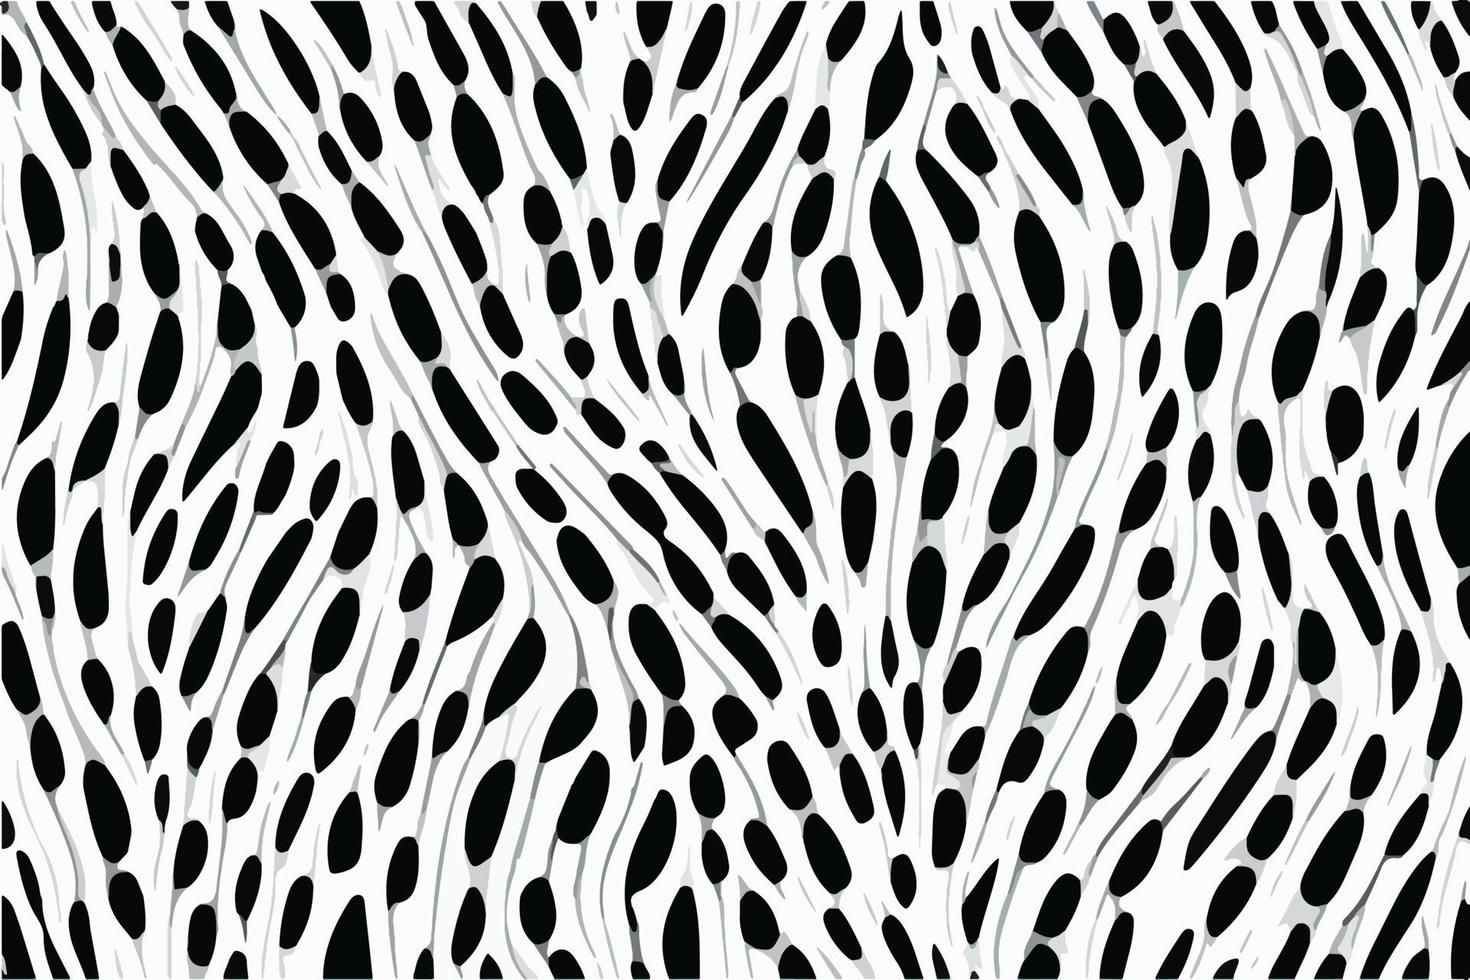 Sleek and Chic - Seamless Black and White Leopard Vector Pattern